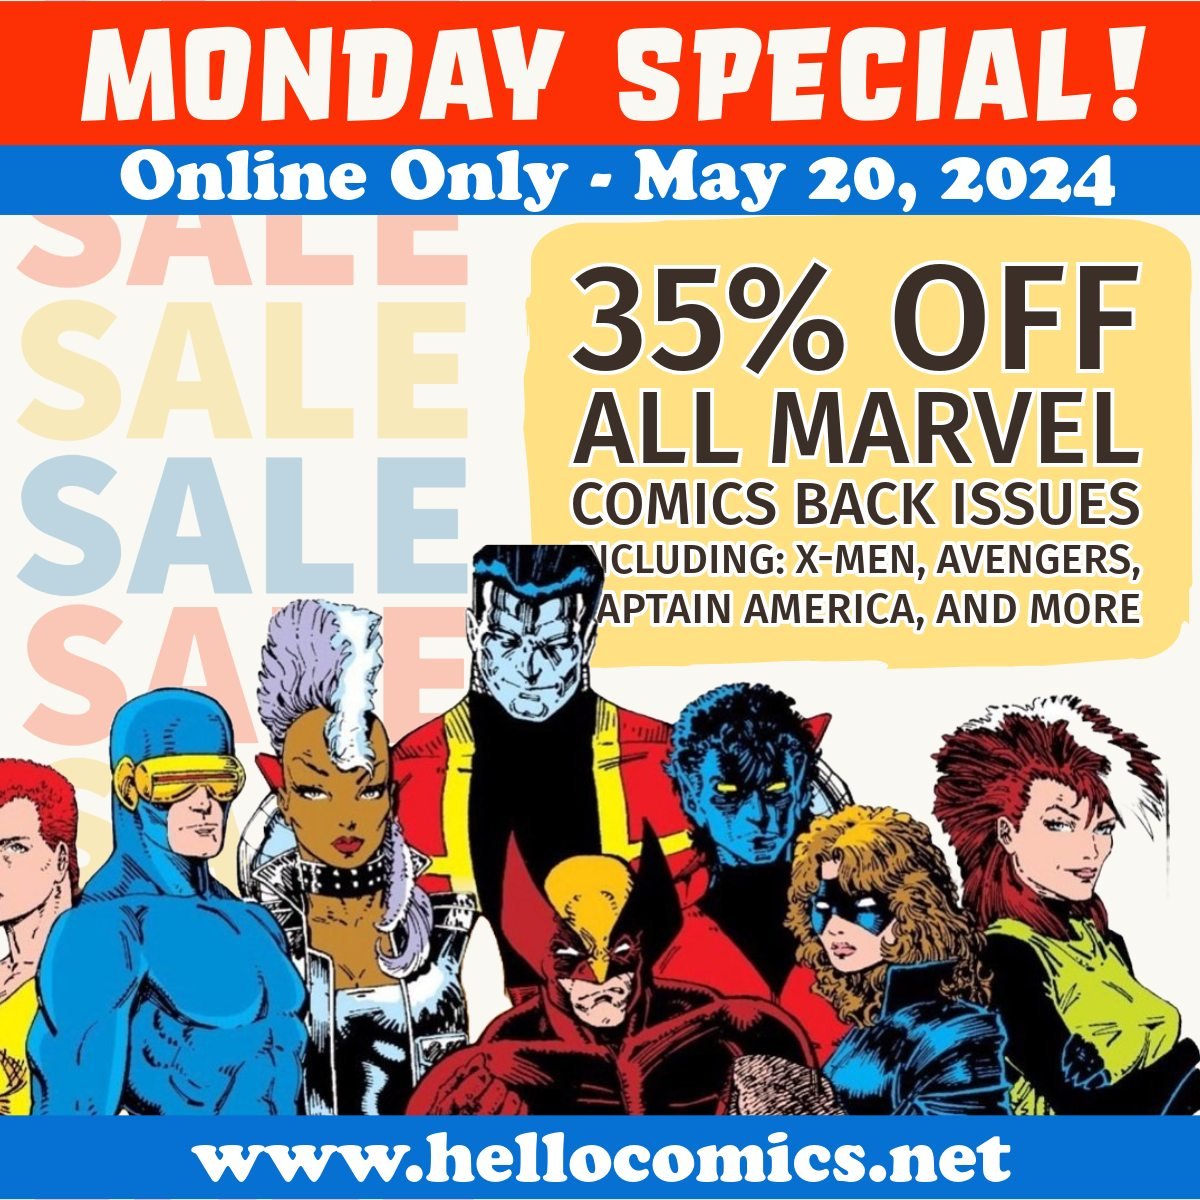 Monday Special is up on the website! 35% off all Marvel Back issues. Hope you guys are having a great start to your week!